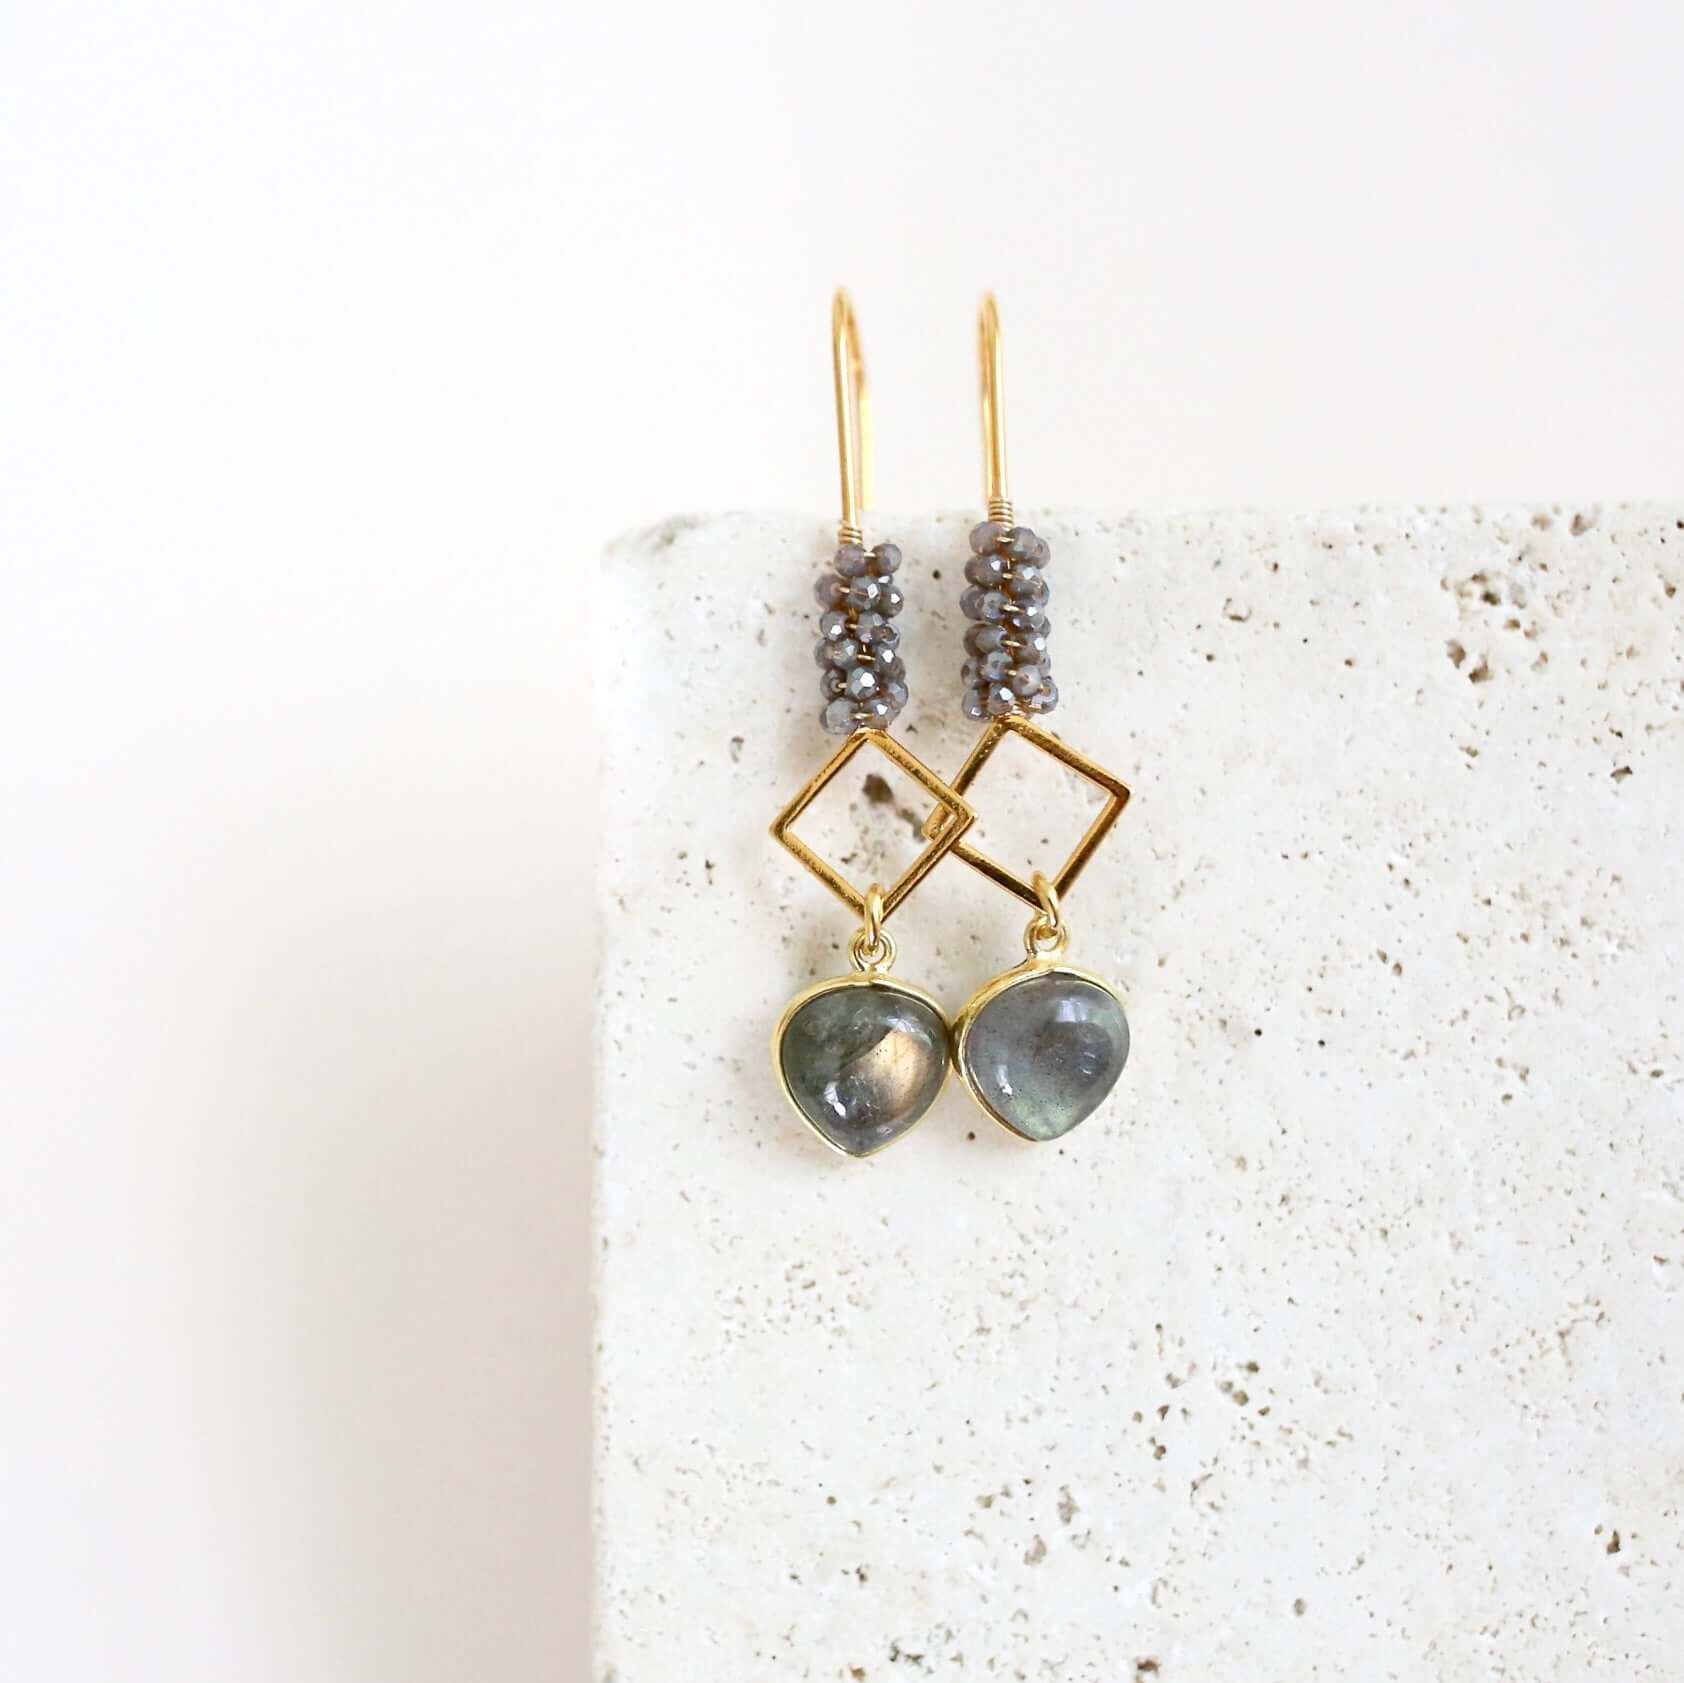 Geometrically inspired labradorite earrings for a modern and chic look